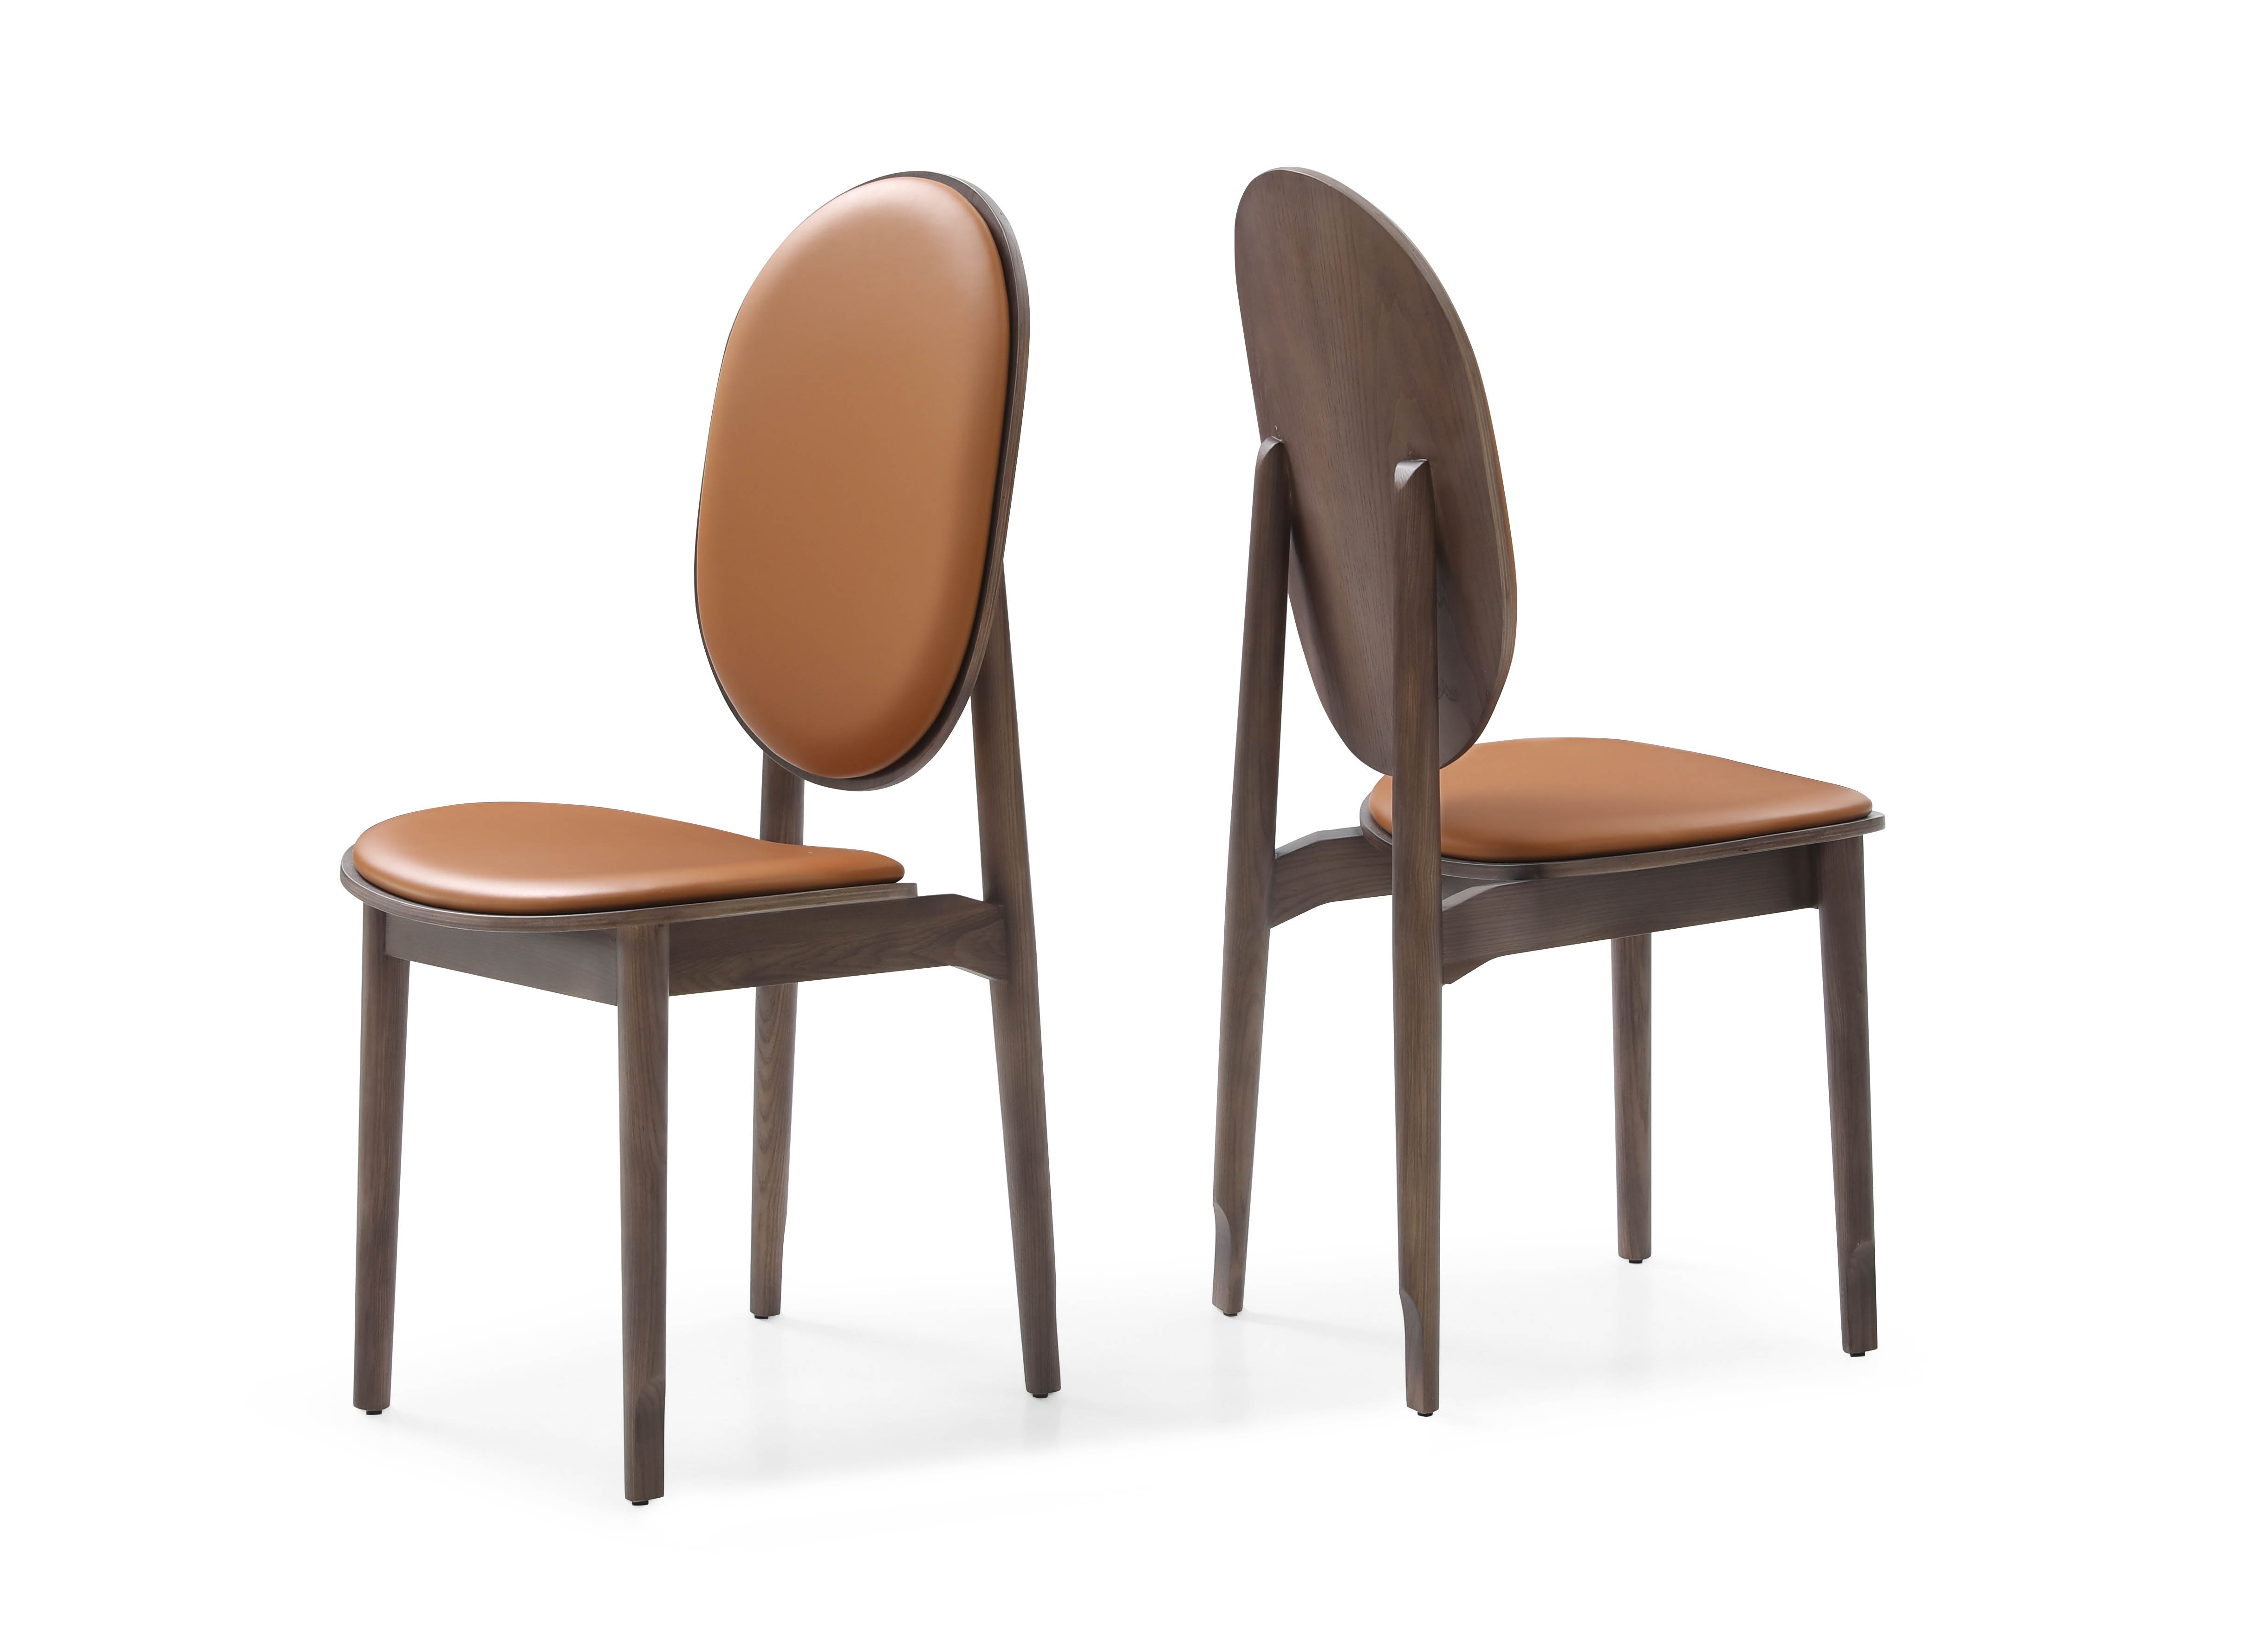 MOON CHAIR WITH HIGH BACK / OVAL2021-2